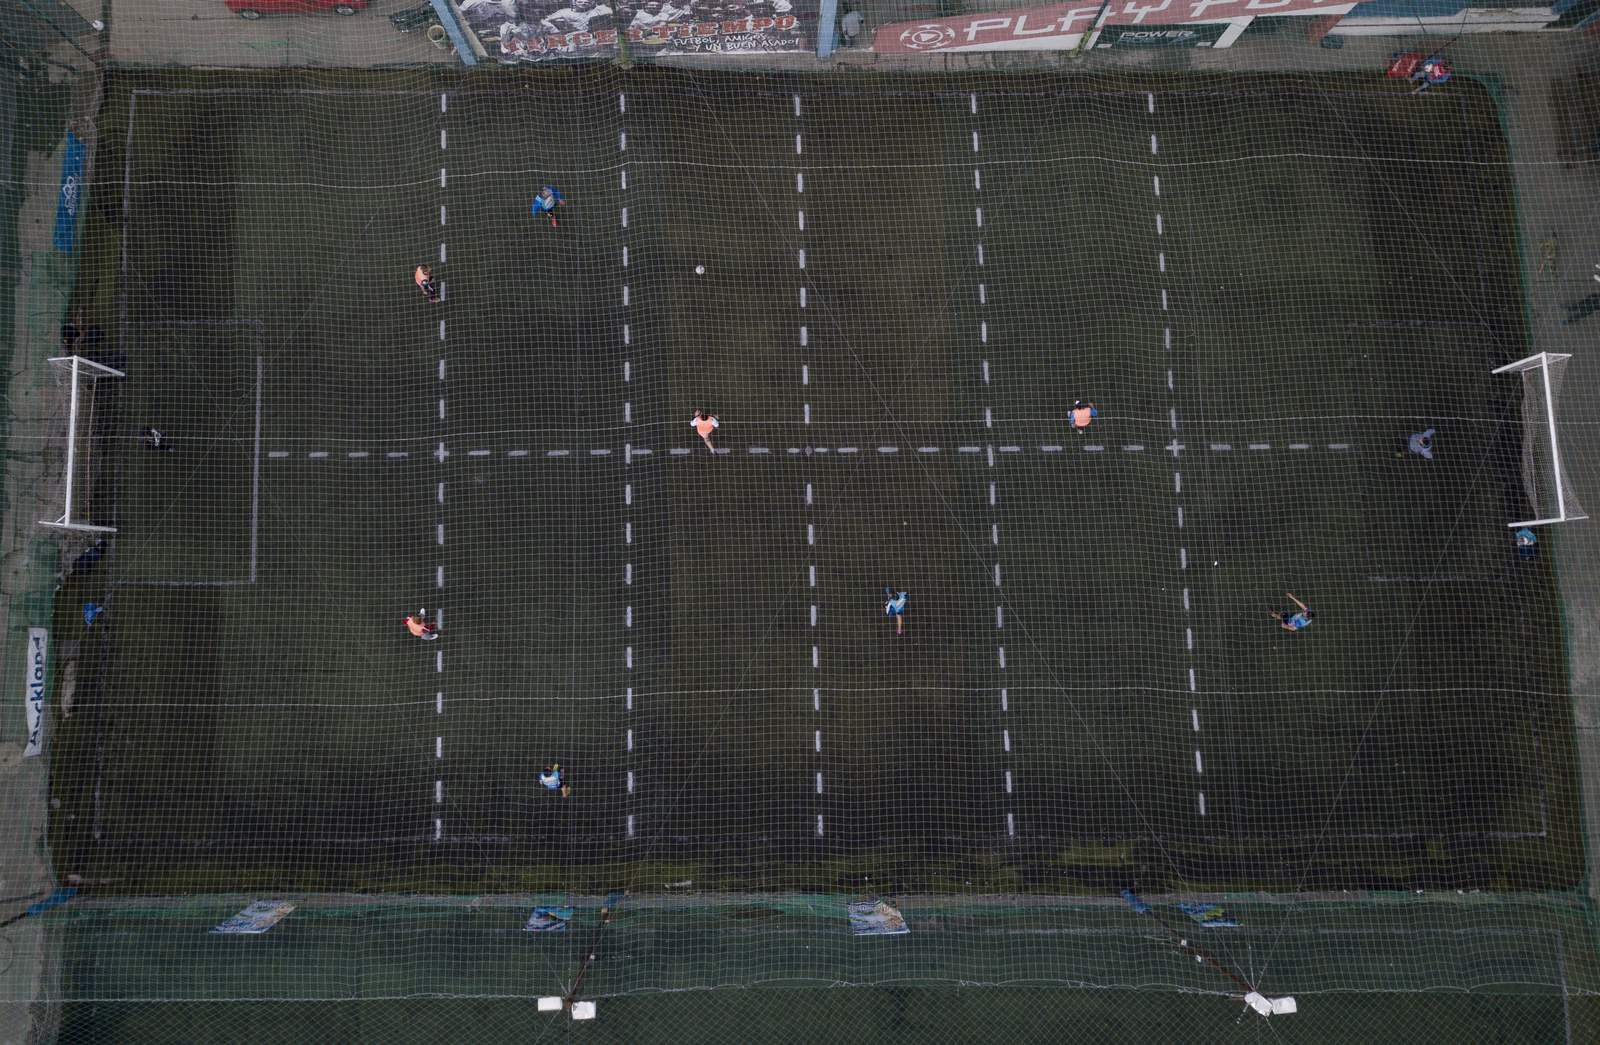 Human foosball: New form of soccer developed for pandemic